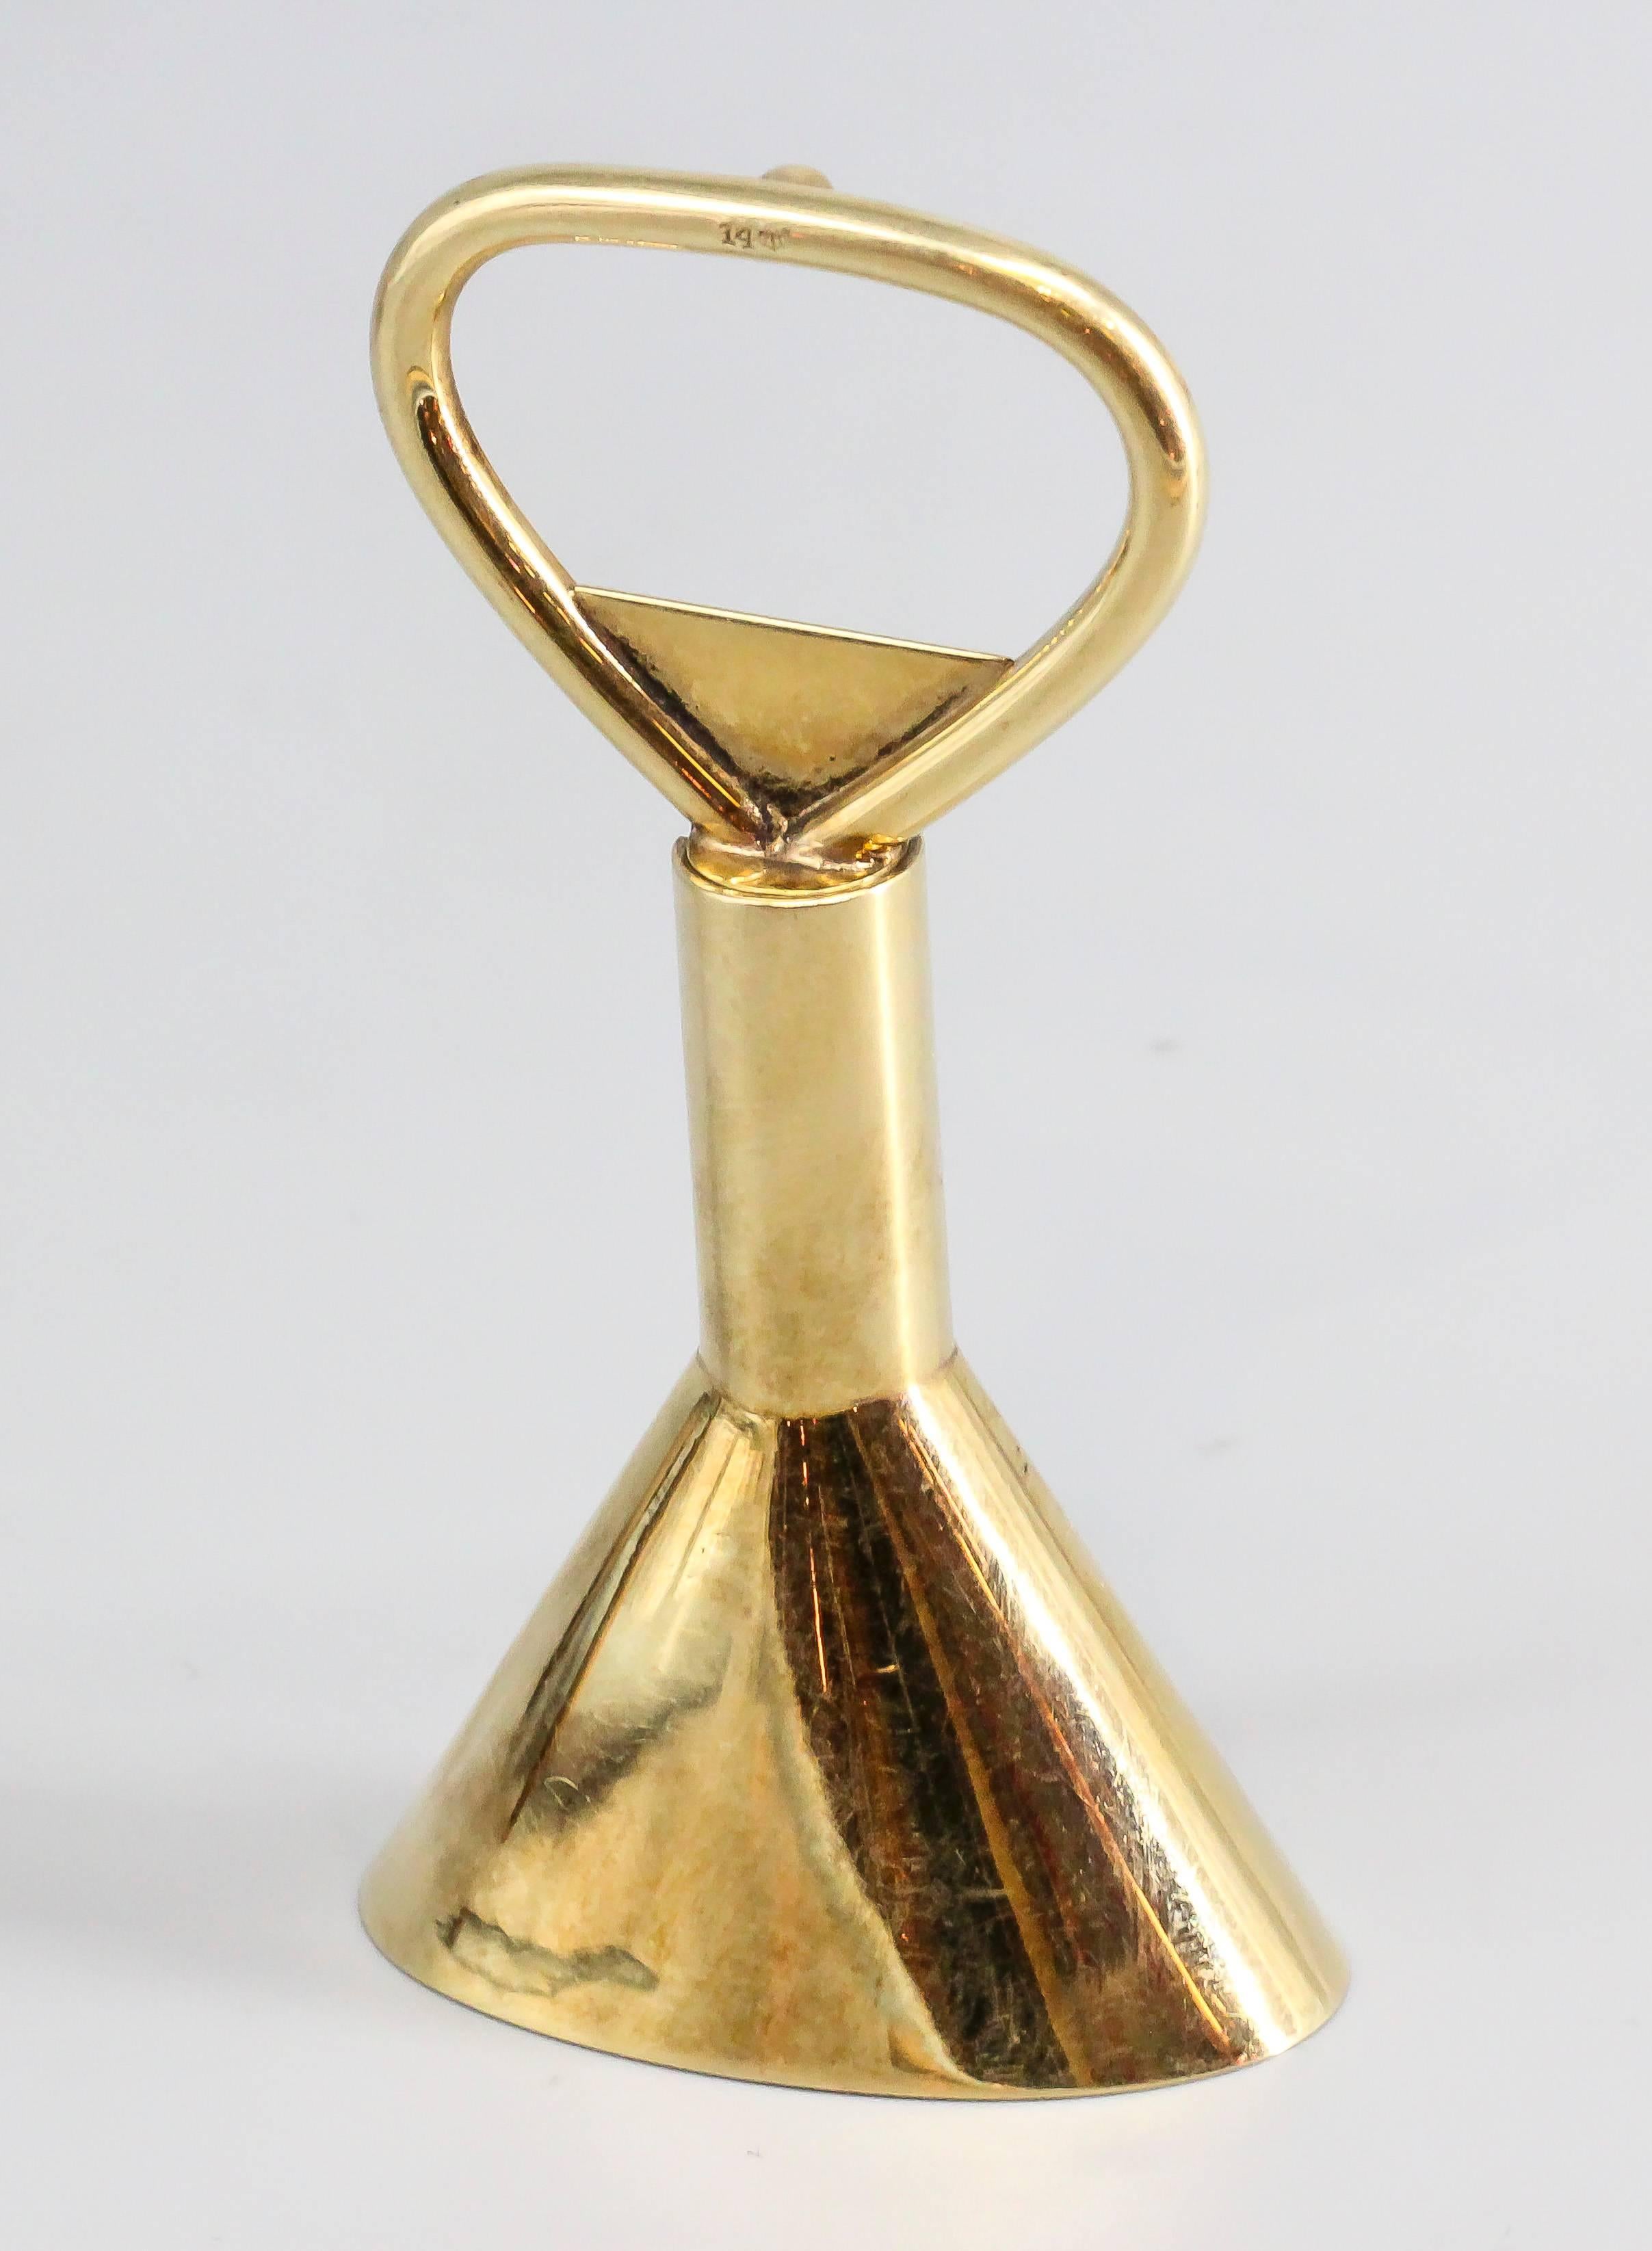 Interesting and unusual Retro Era 14k yellow gold and steel corkscrew and funnel combination. A wonderful gift idea for the wine enthusiast on the go. Funnel bears initial that can be polished by any local jeweler. 

Hallmarks: 14k